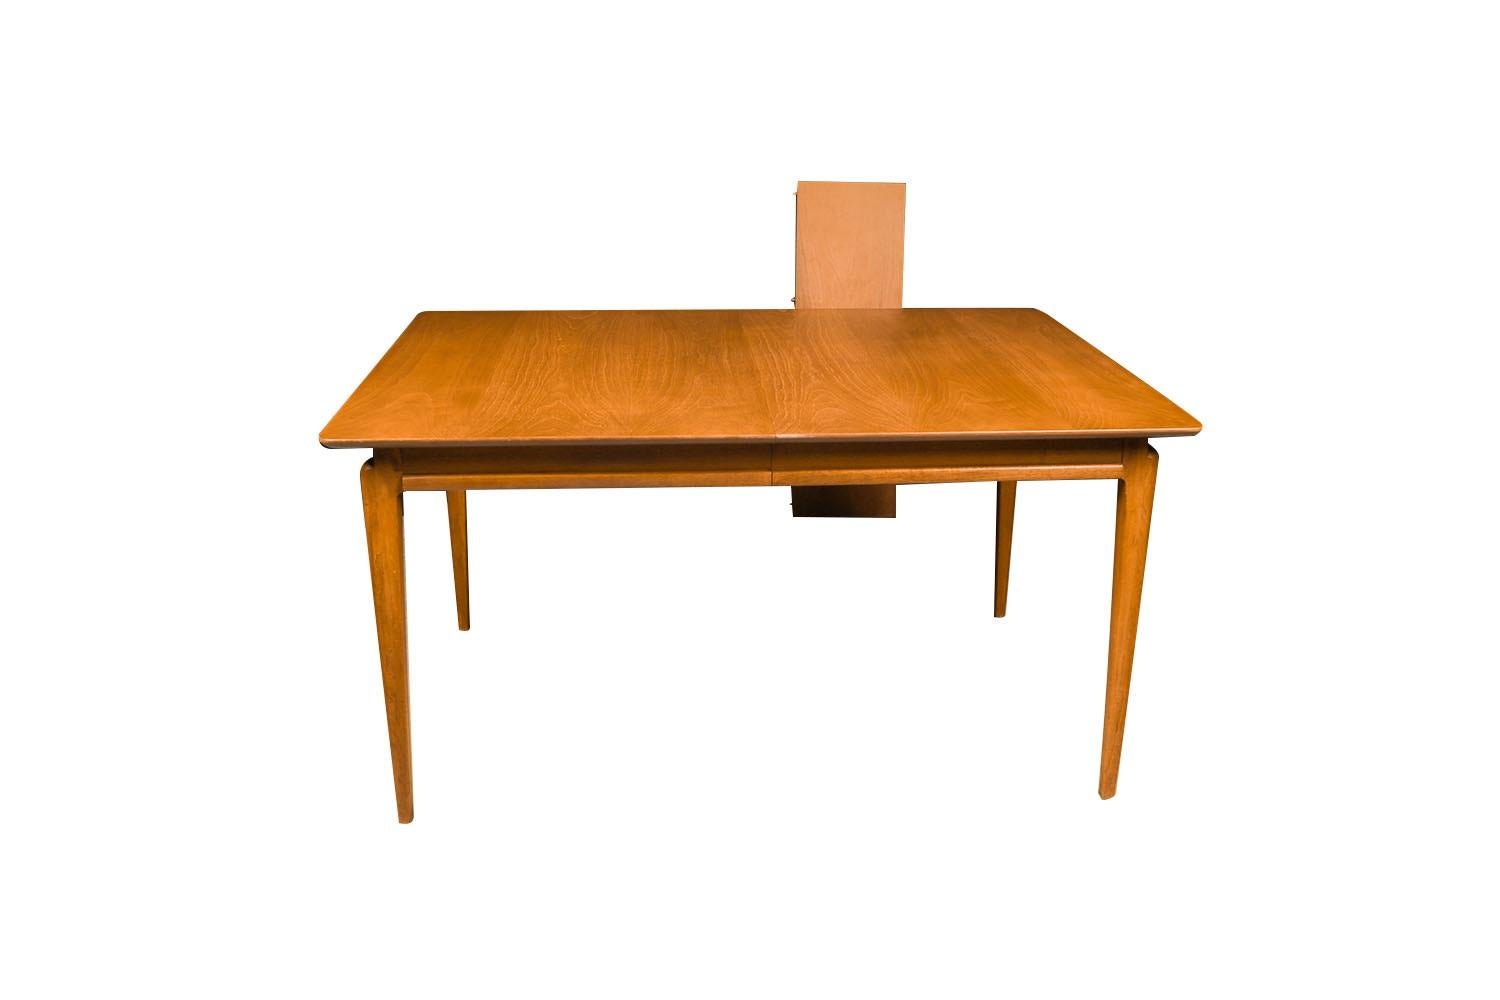 Stunning vintage Mid-Century Modern walnut dining table in great original condition, designed by John Van Koert for the Drexel Projection line, circa 1950s. Features a beautiful sculpted top, a simple but sophisticated design. Raised over four